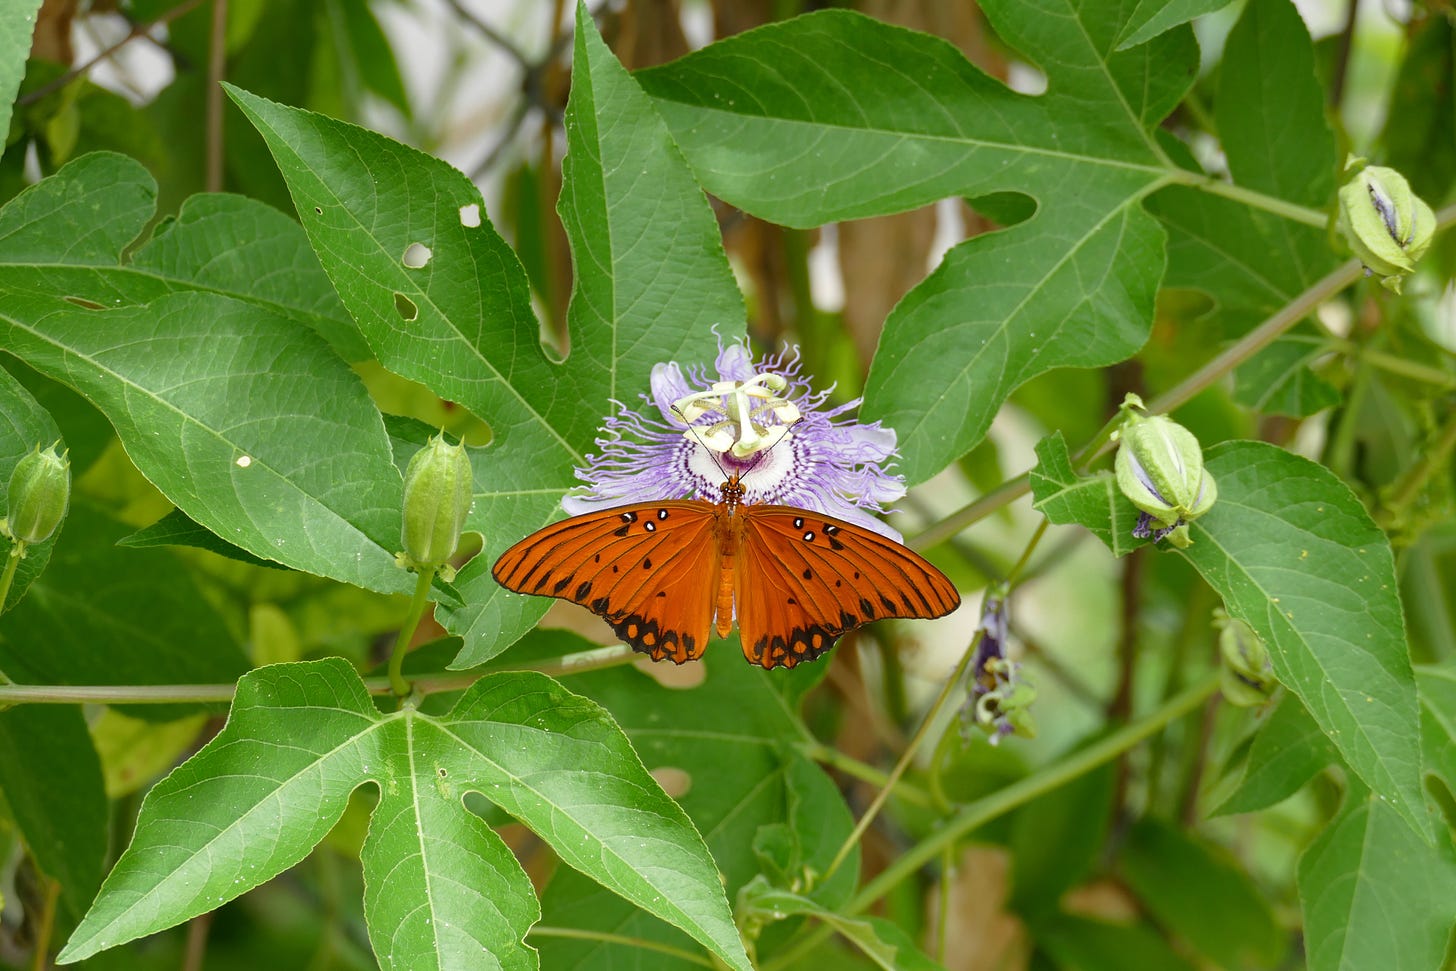 Gulf fritillary butterfly on passion flower